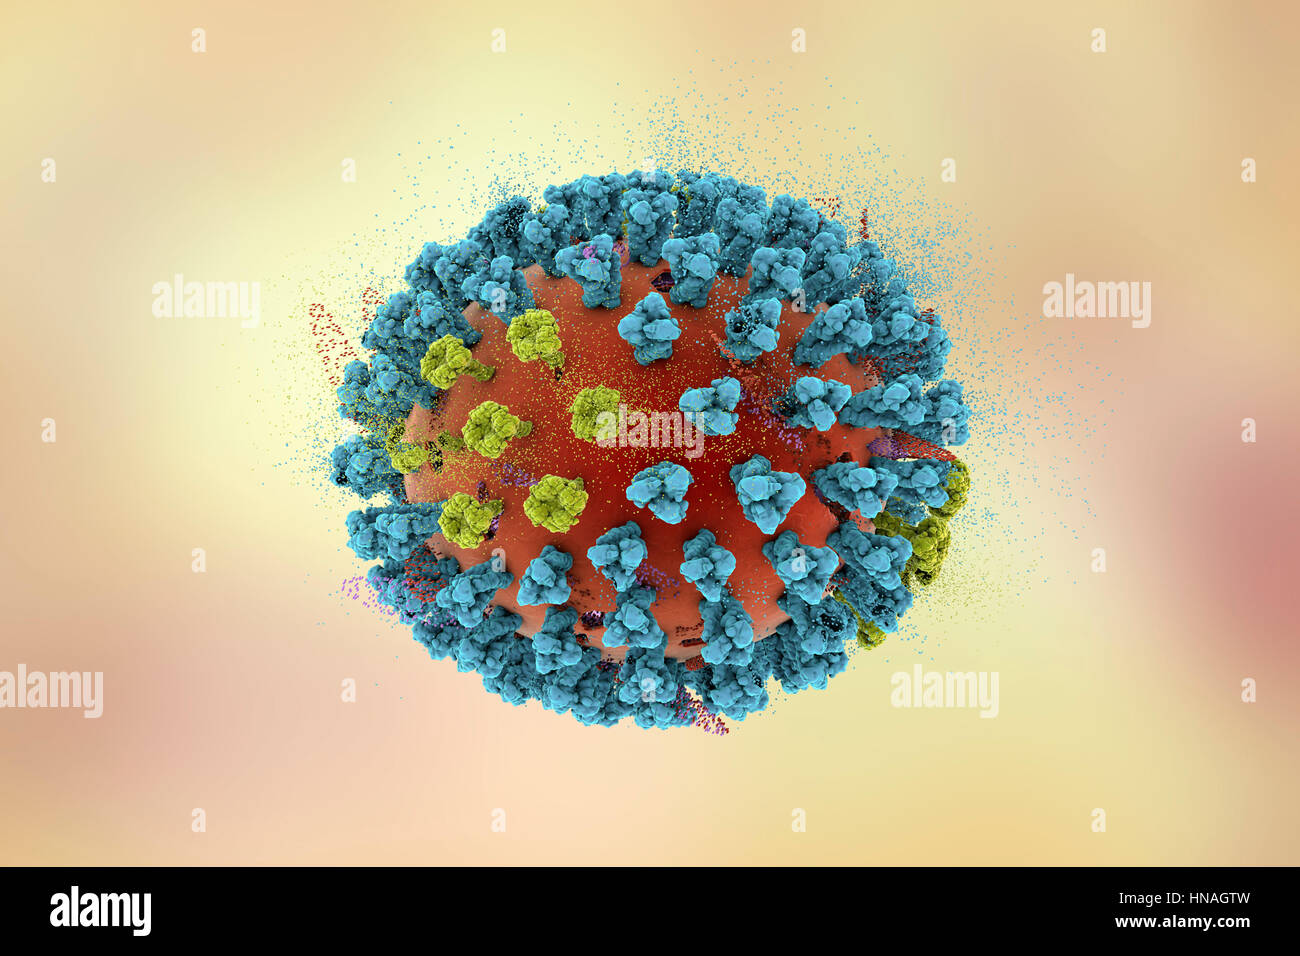 Destruction of bird flu virus, conceptual 3D illustration. This is an avian influenza H5N8 virus particle. This strain of the virus has caused disease in wild birds and poultry in Europe and Asia since June 2016. Unusually, the virus causes mortality in wild birds, which are more often silent carriers. As of February 2017 no human cases of the disease have been reported, and risk of transmission to humans is thought to be low. Stock Photo